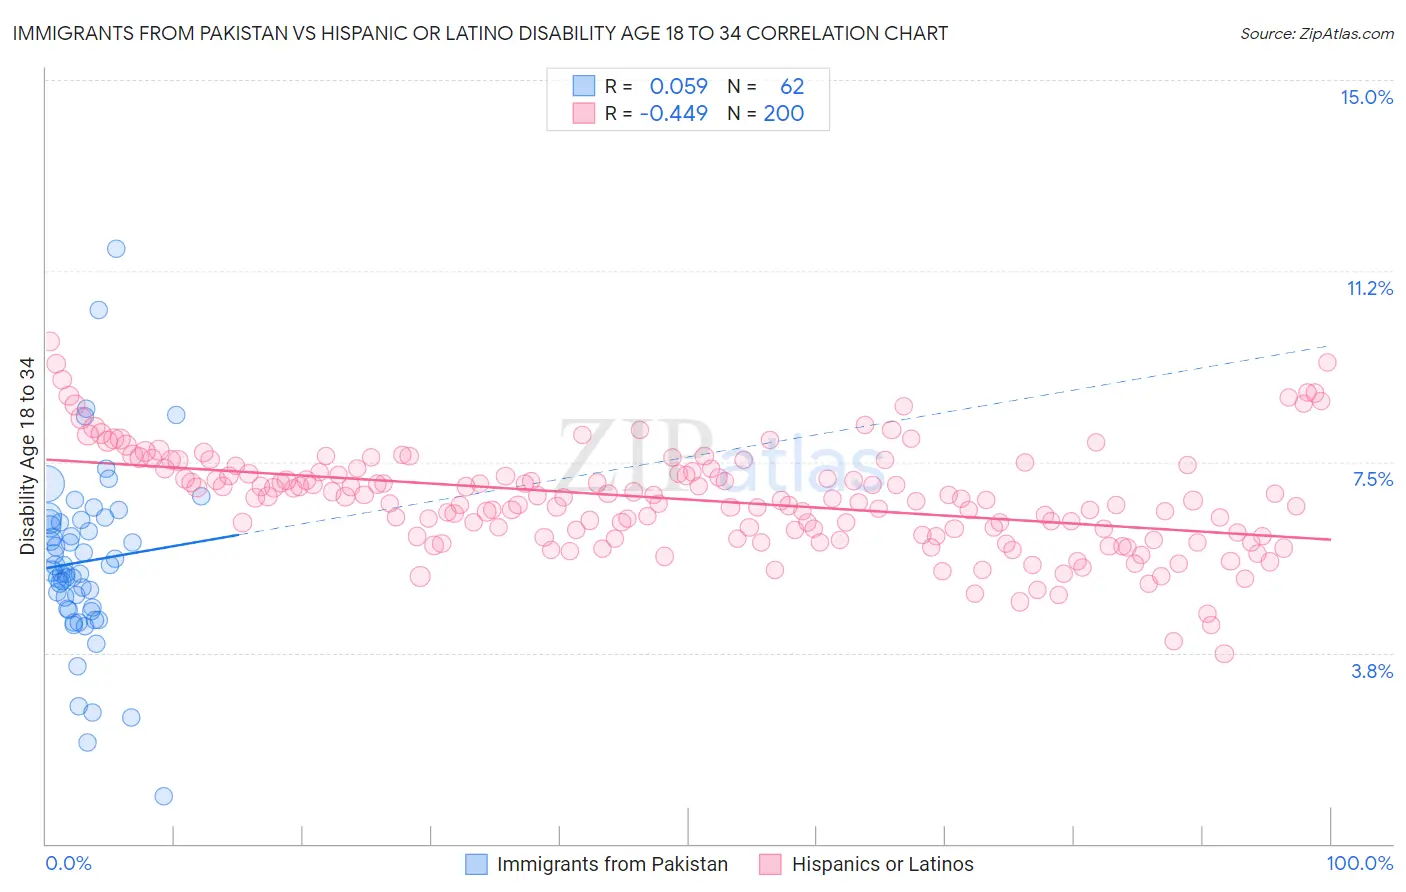 Immigrants from Pakistan vs Hispanic or Latino Disability Age 18 to 34